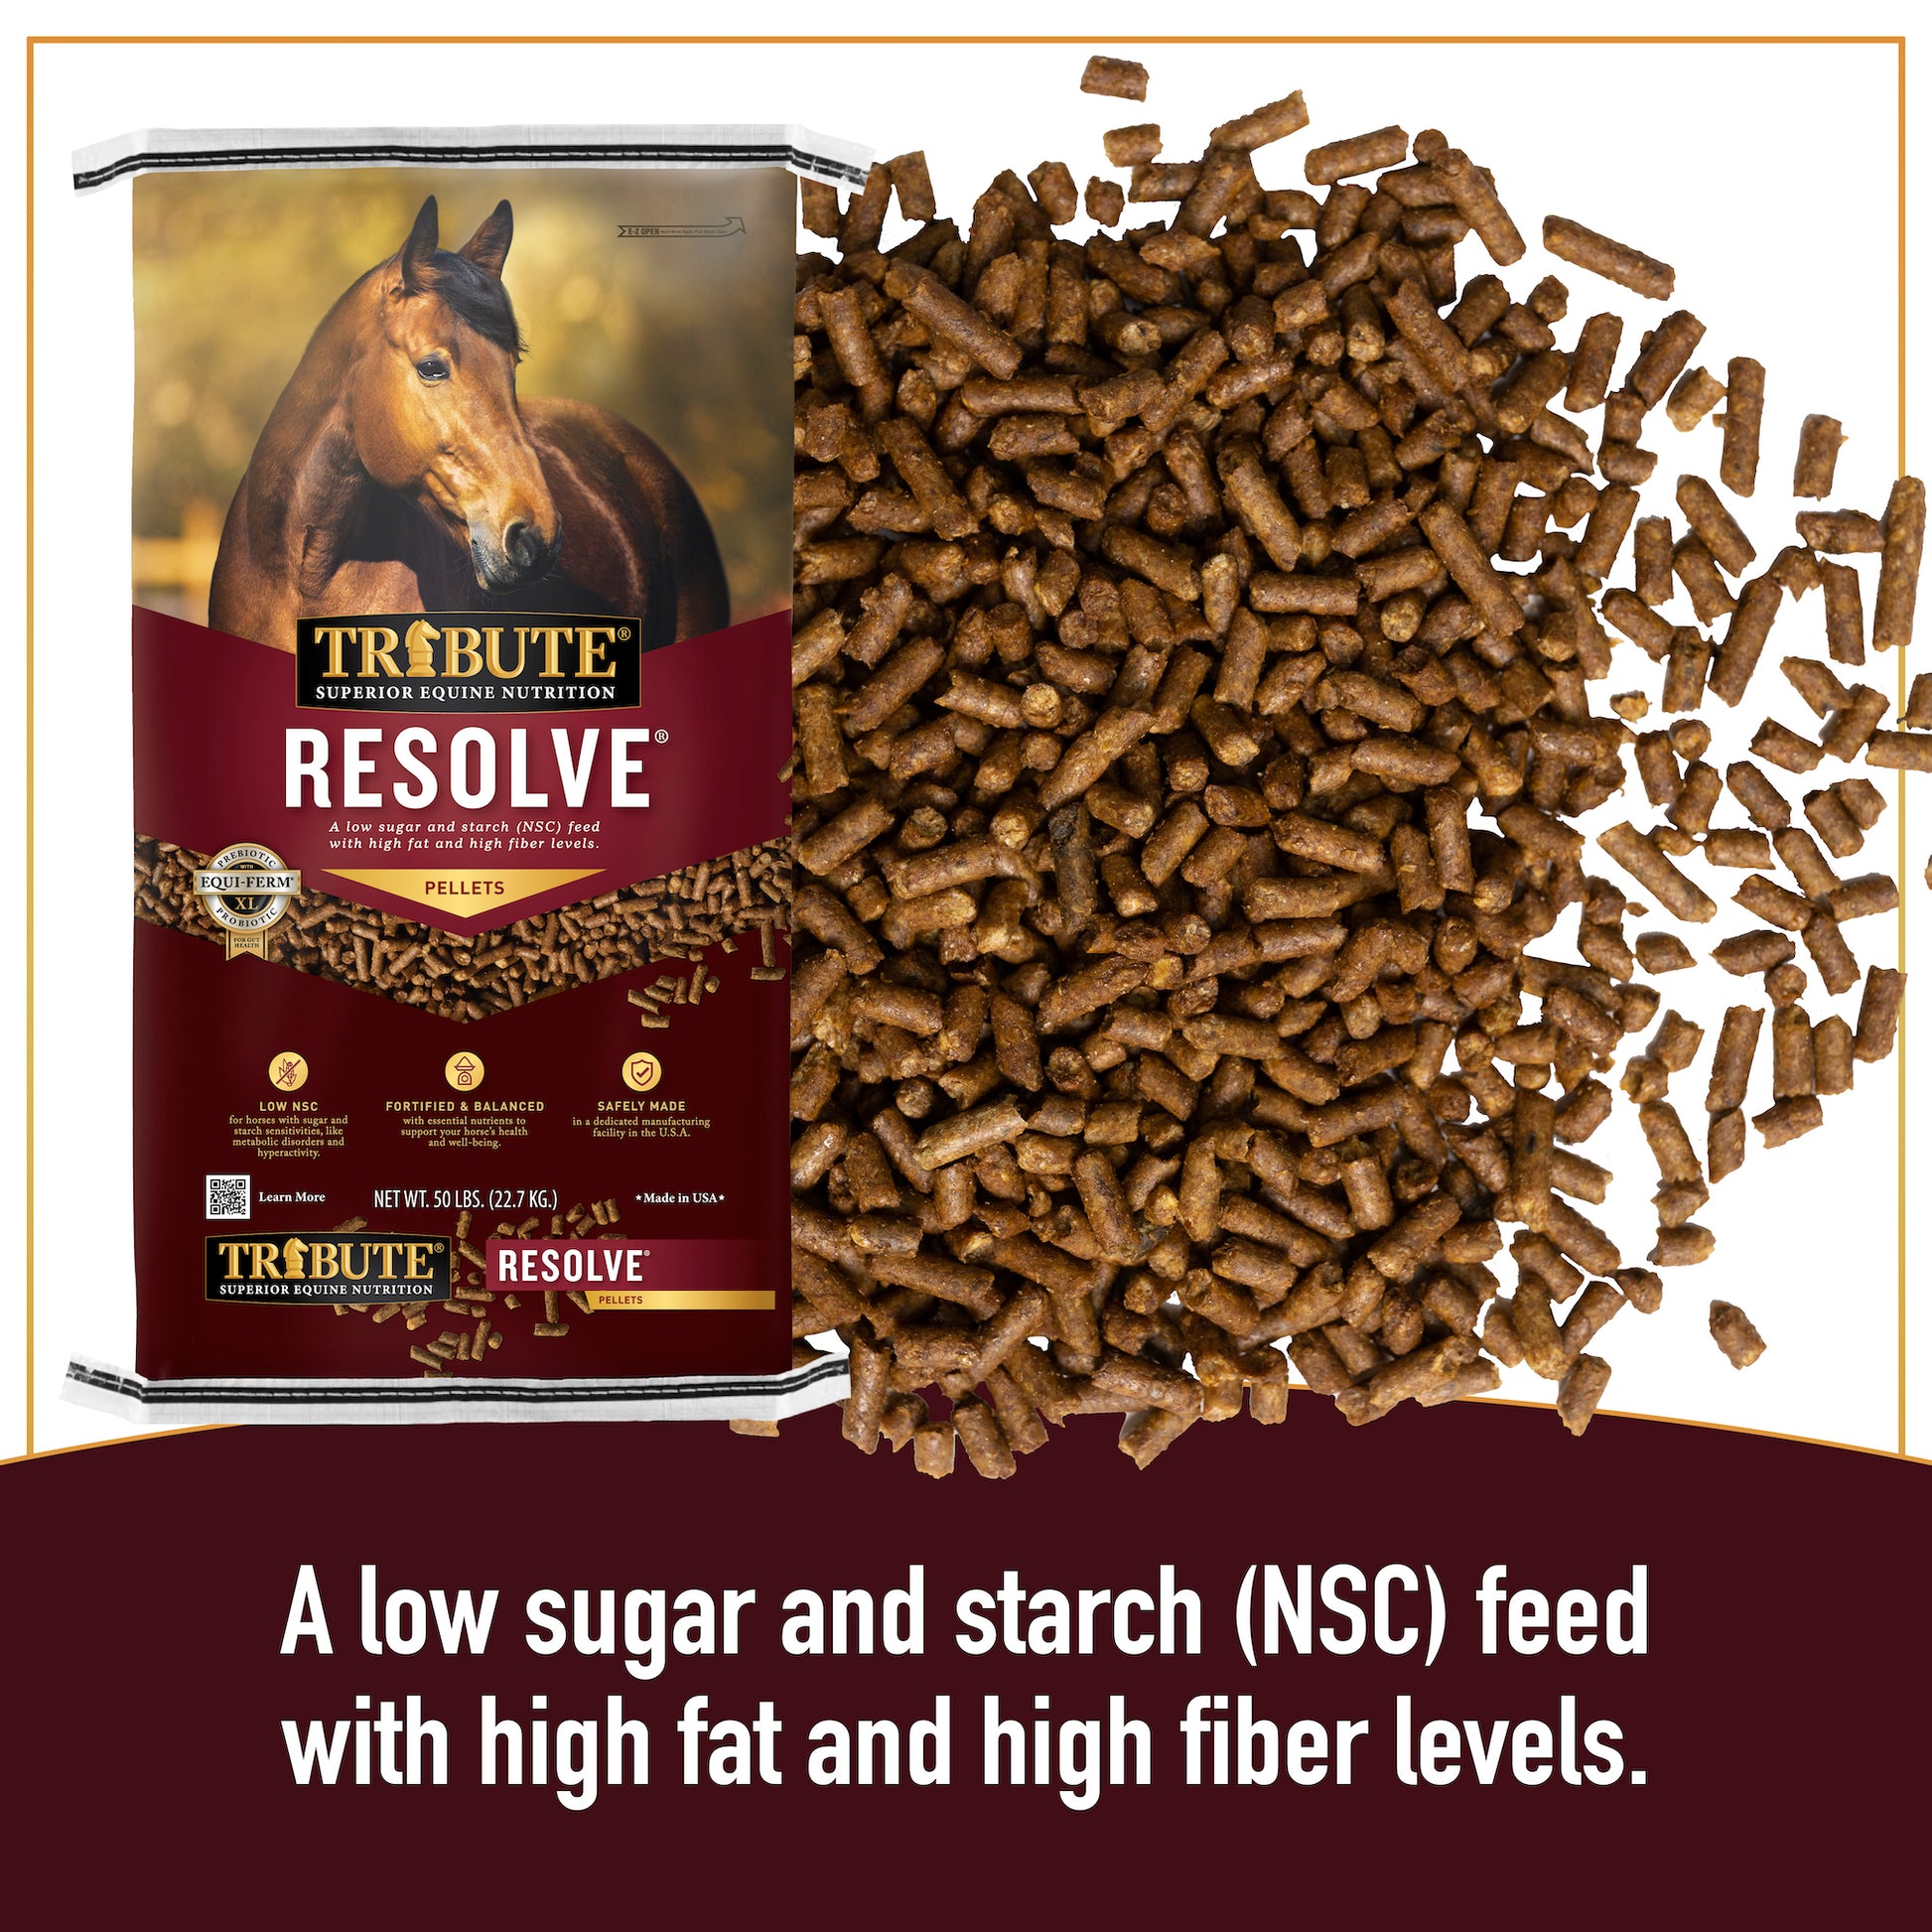 A Simple, Logical, Inexpensive Way to Feed your Horse? - Hi Form Equine -  Premium Horse Supplements